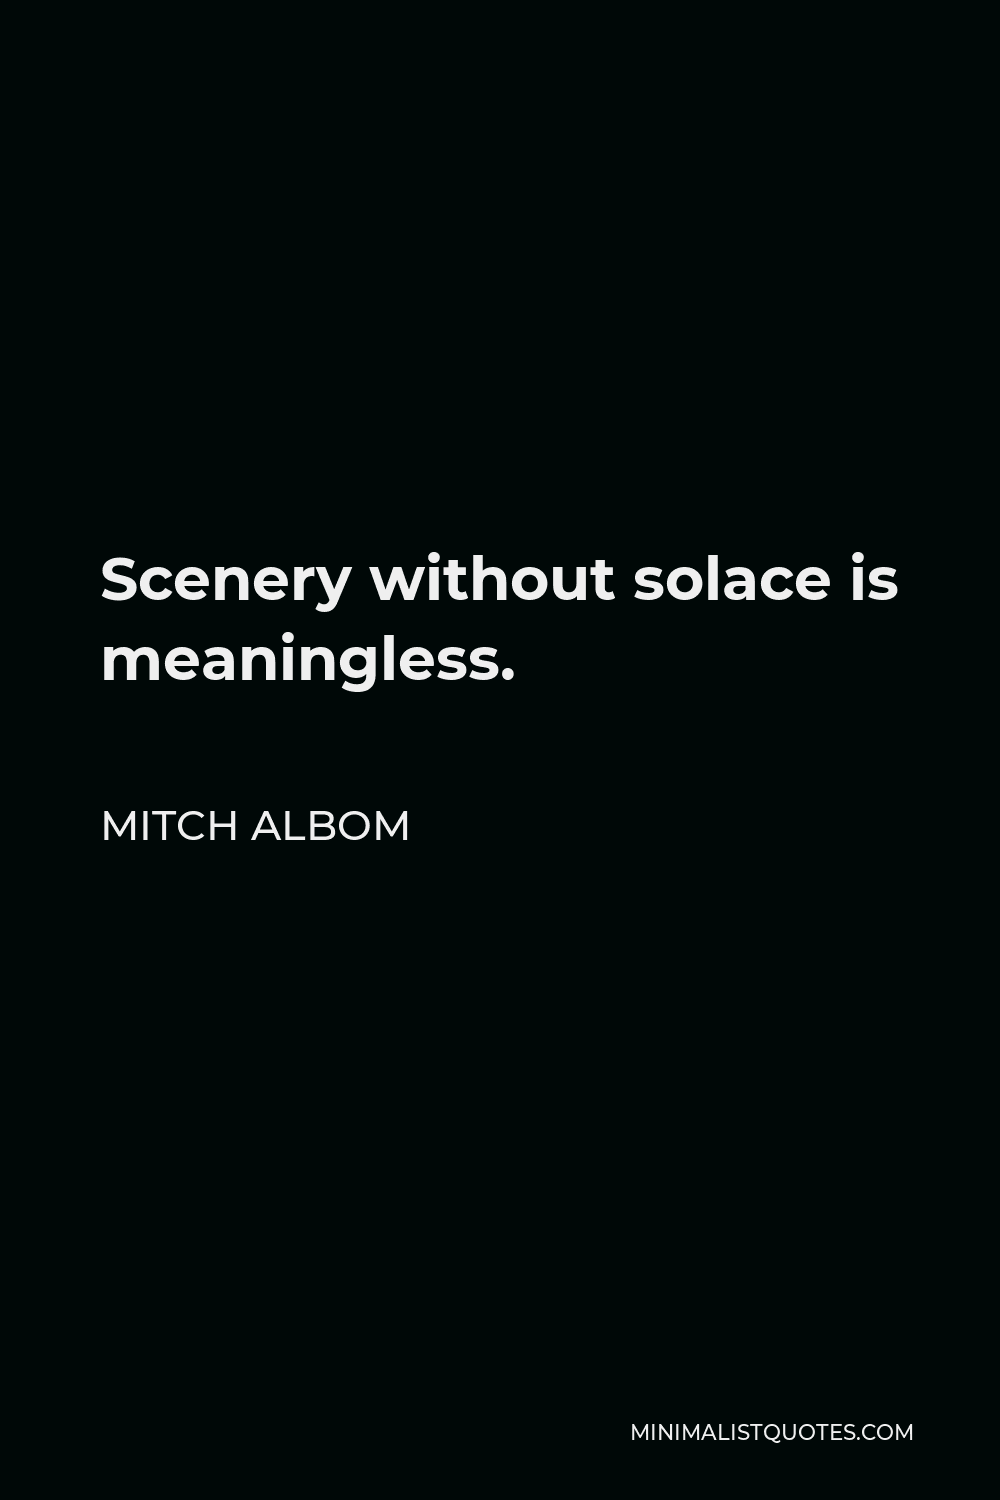 Mitch Albom Quote - Scenery without solace is meaningless.